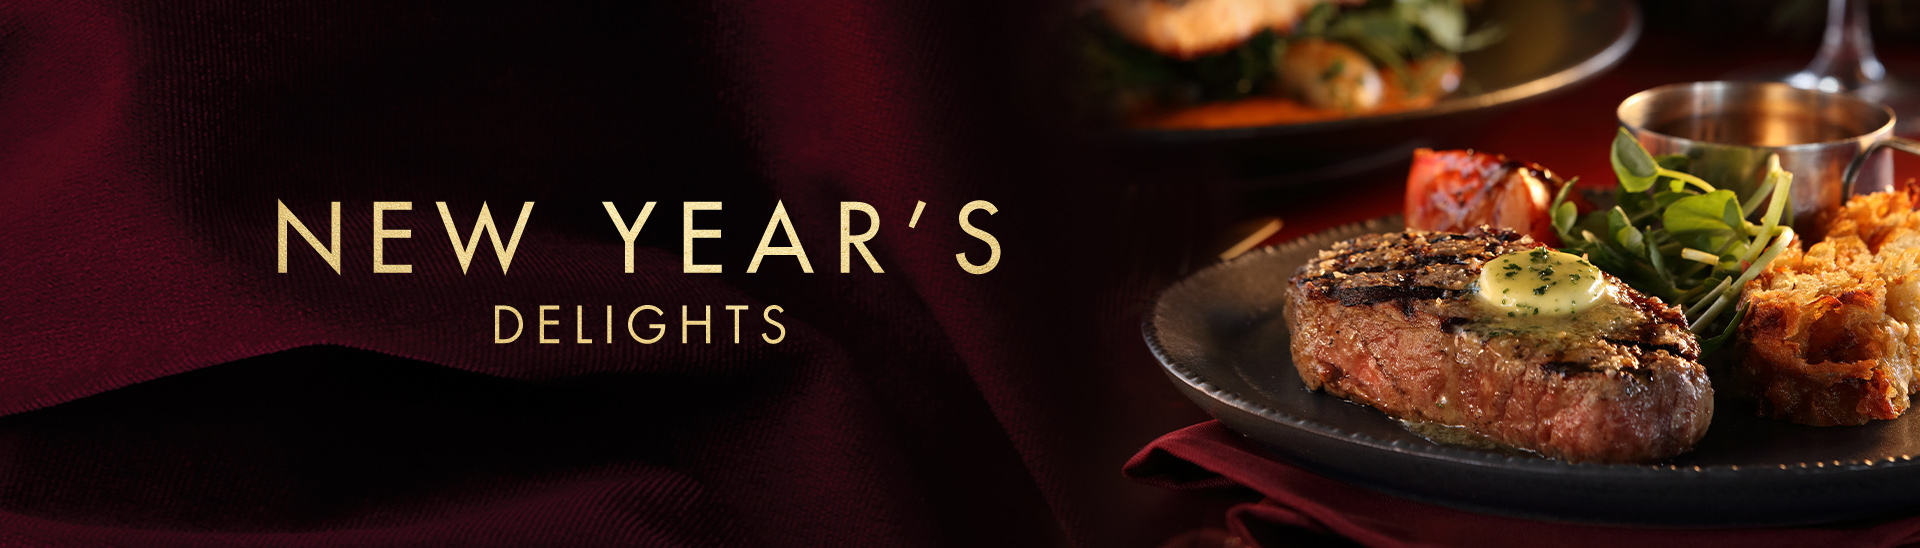 New Year’s Eve 2019 at Miller & Carter Salfords